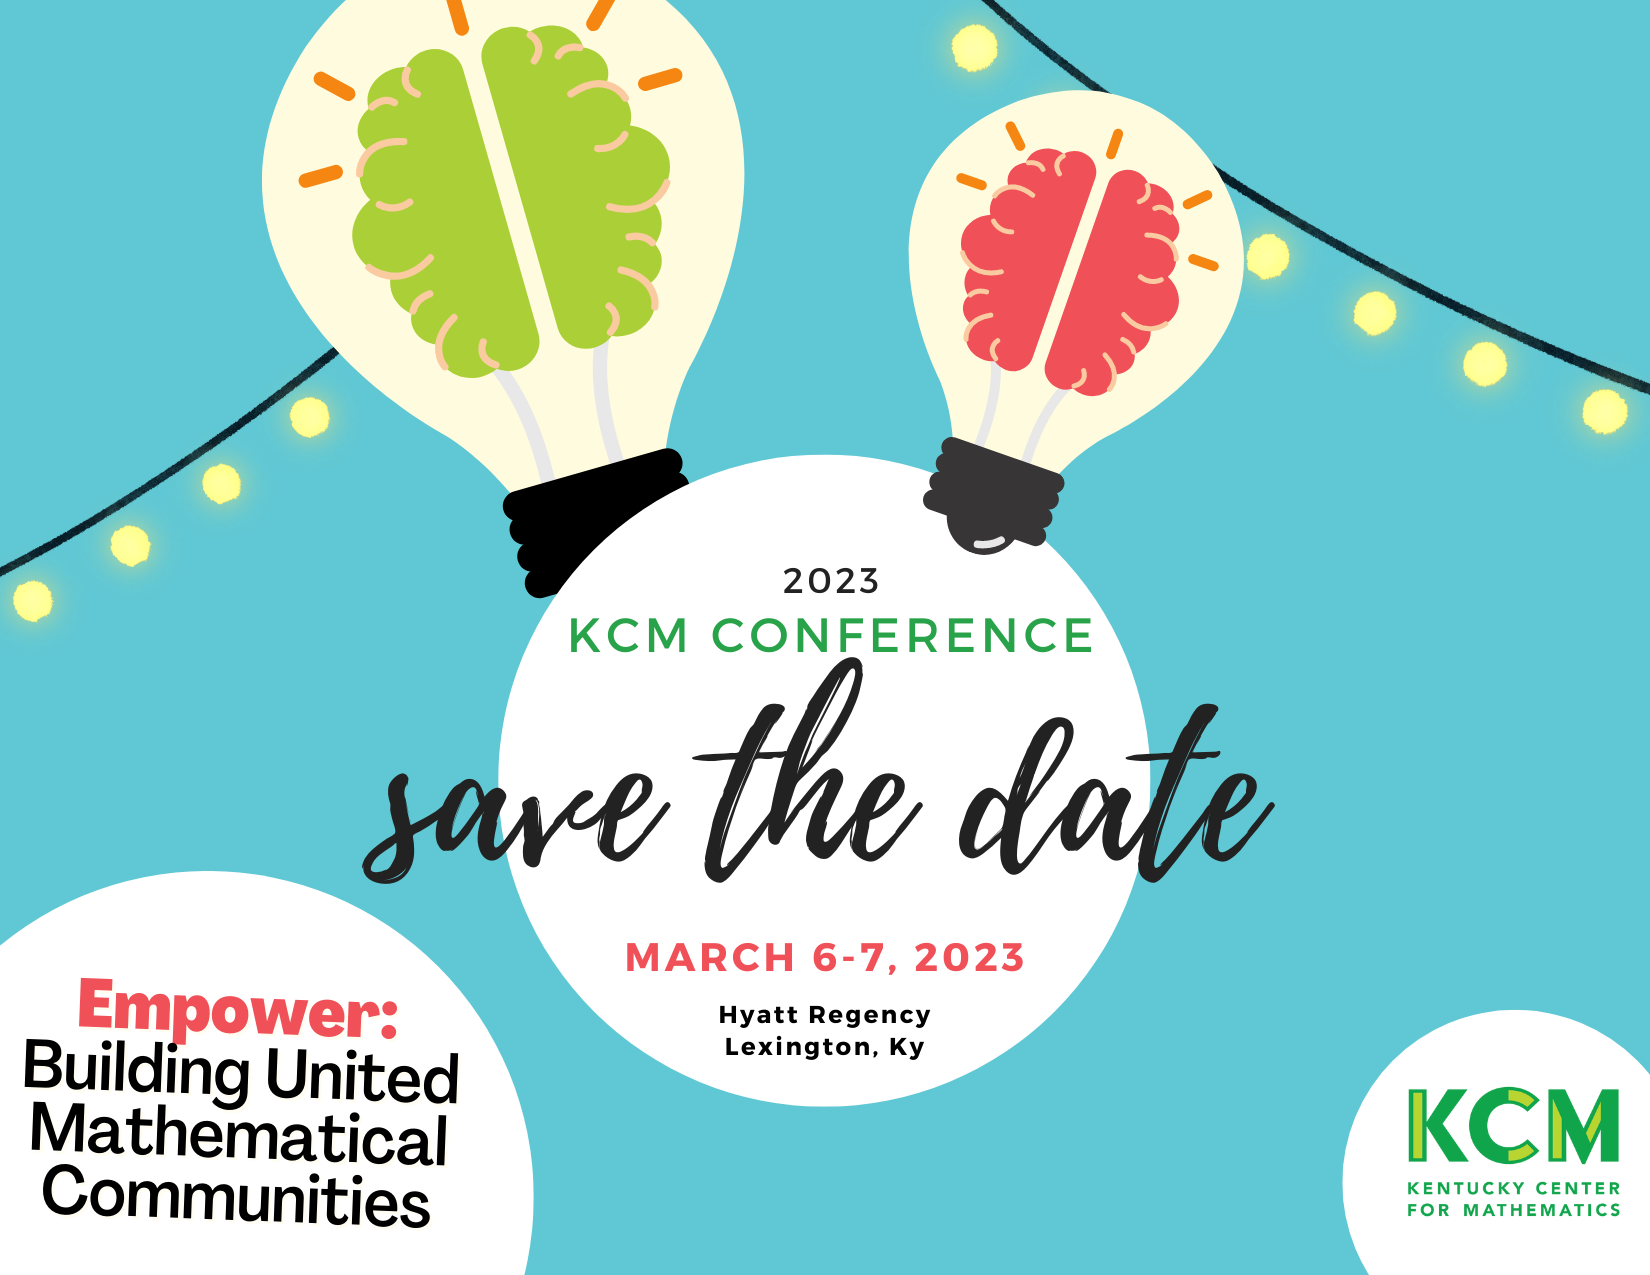 KCM Conference 2022 is March 6-8